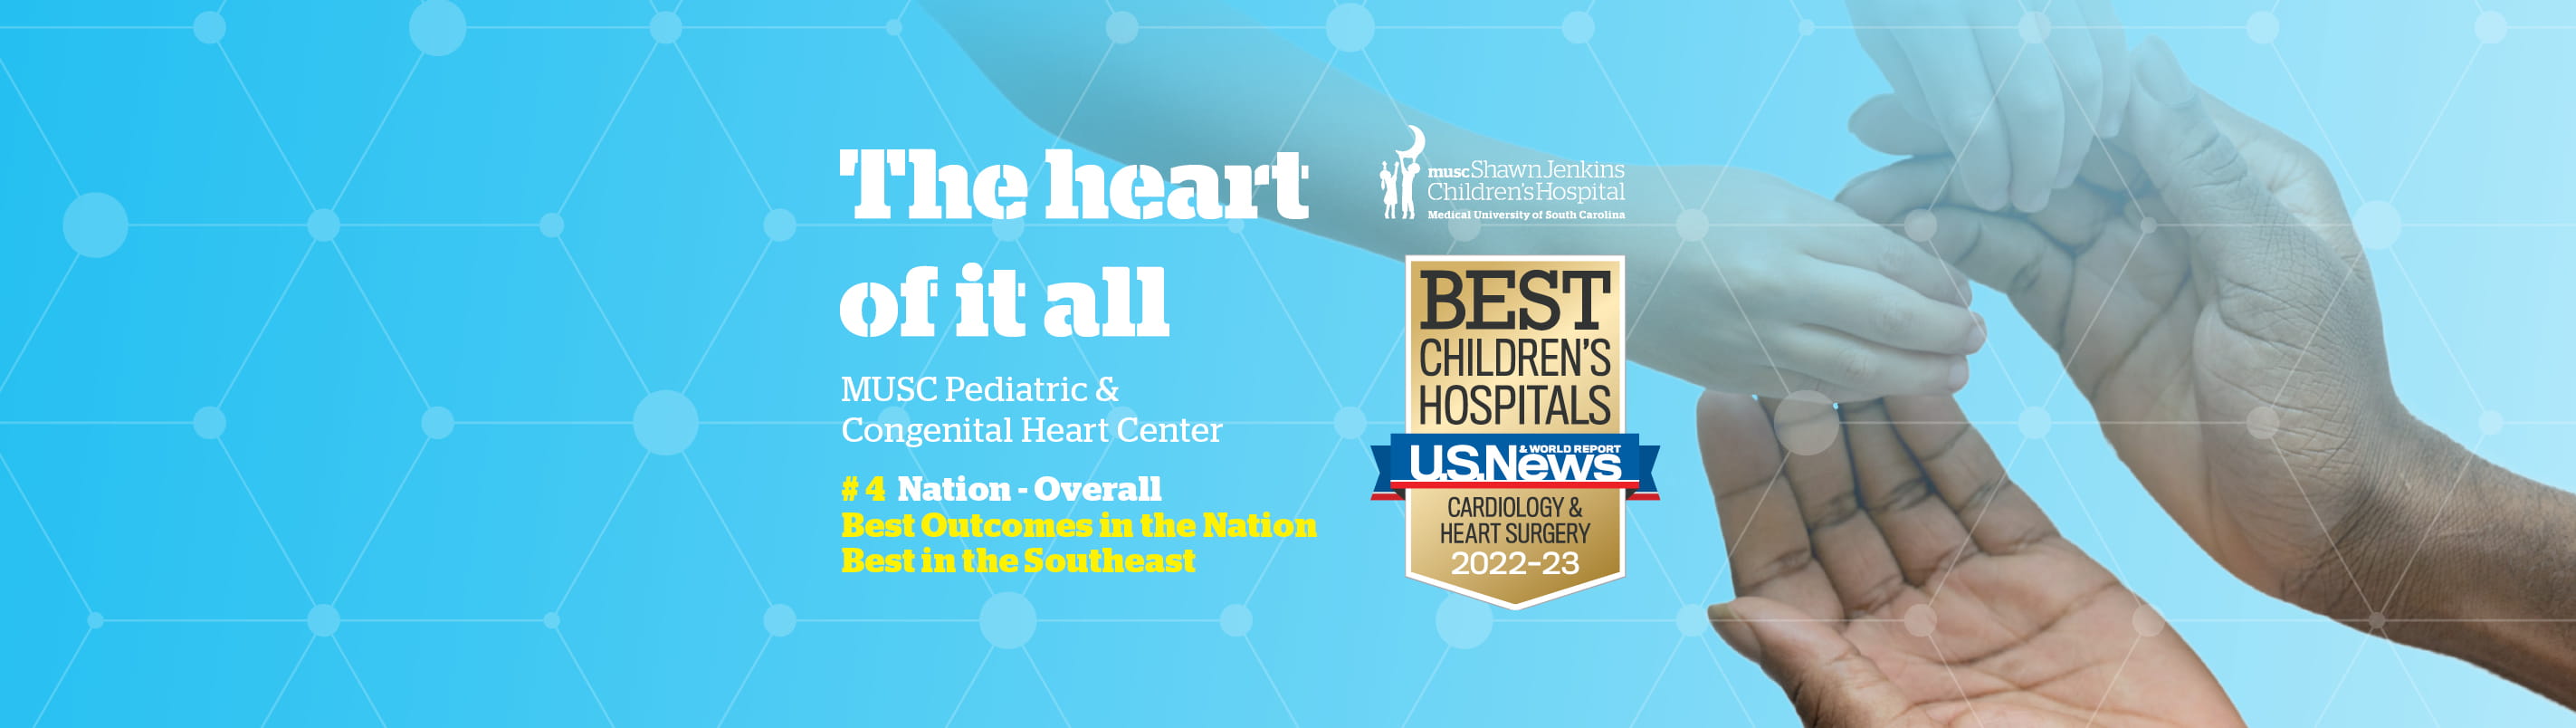 The heart of it all | MUSC Pediatric & Congenital Heart Center Ranked by U.S. News & World Report | #4 Nation - Overall, #1 Nation - Overall | Best Children's Hospitals U.S. News & World Report 2022-23